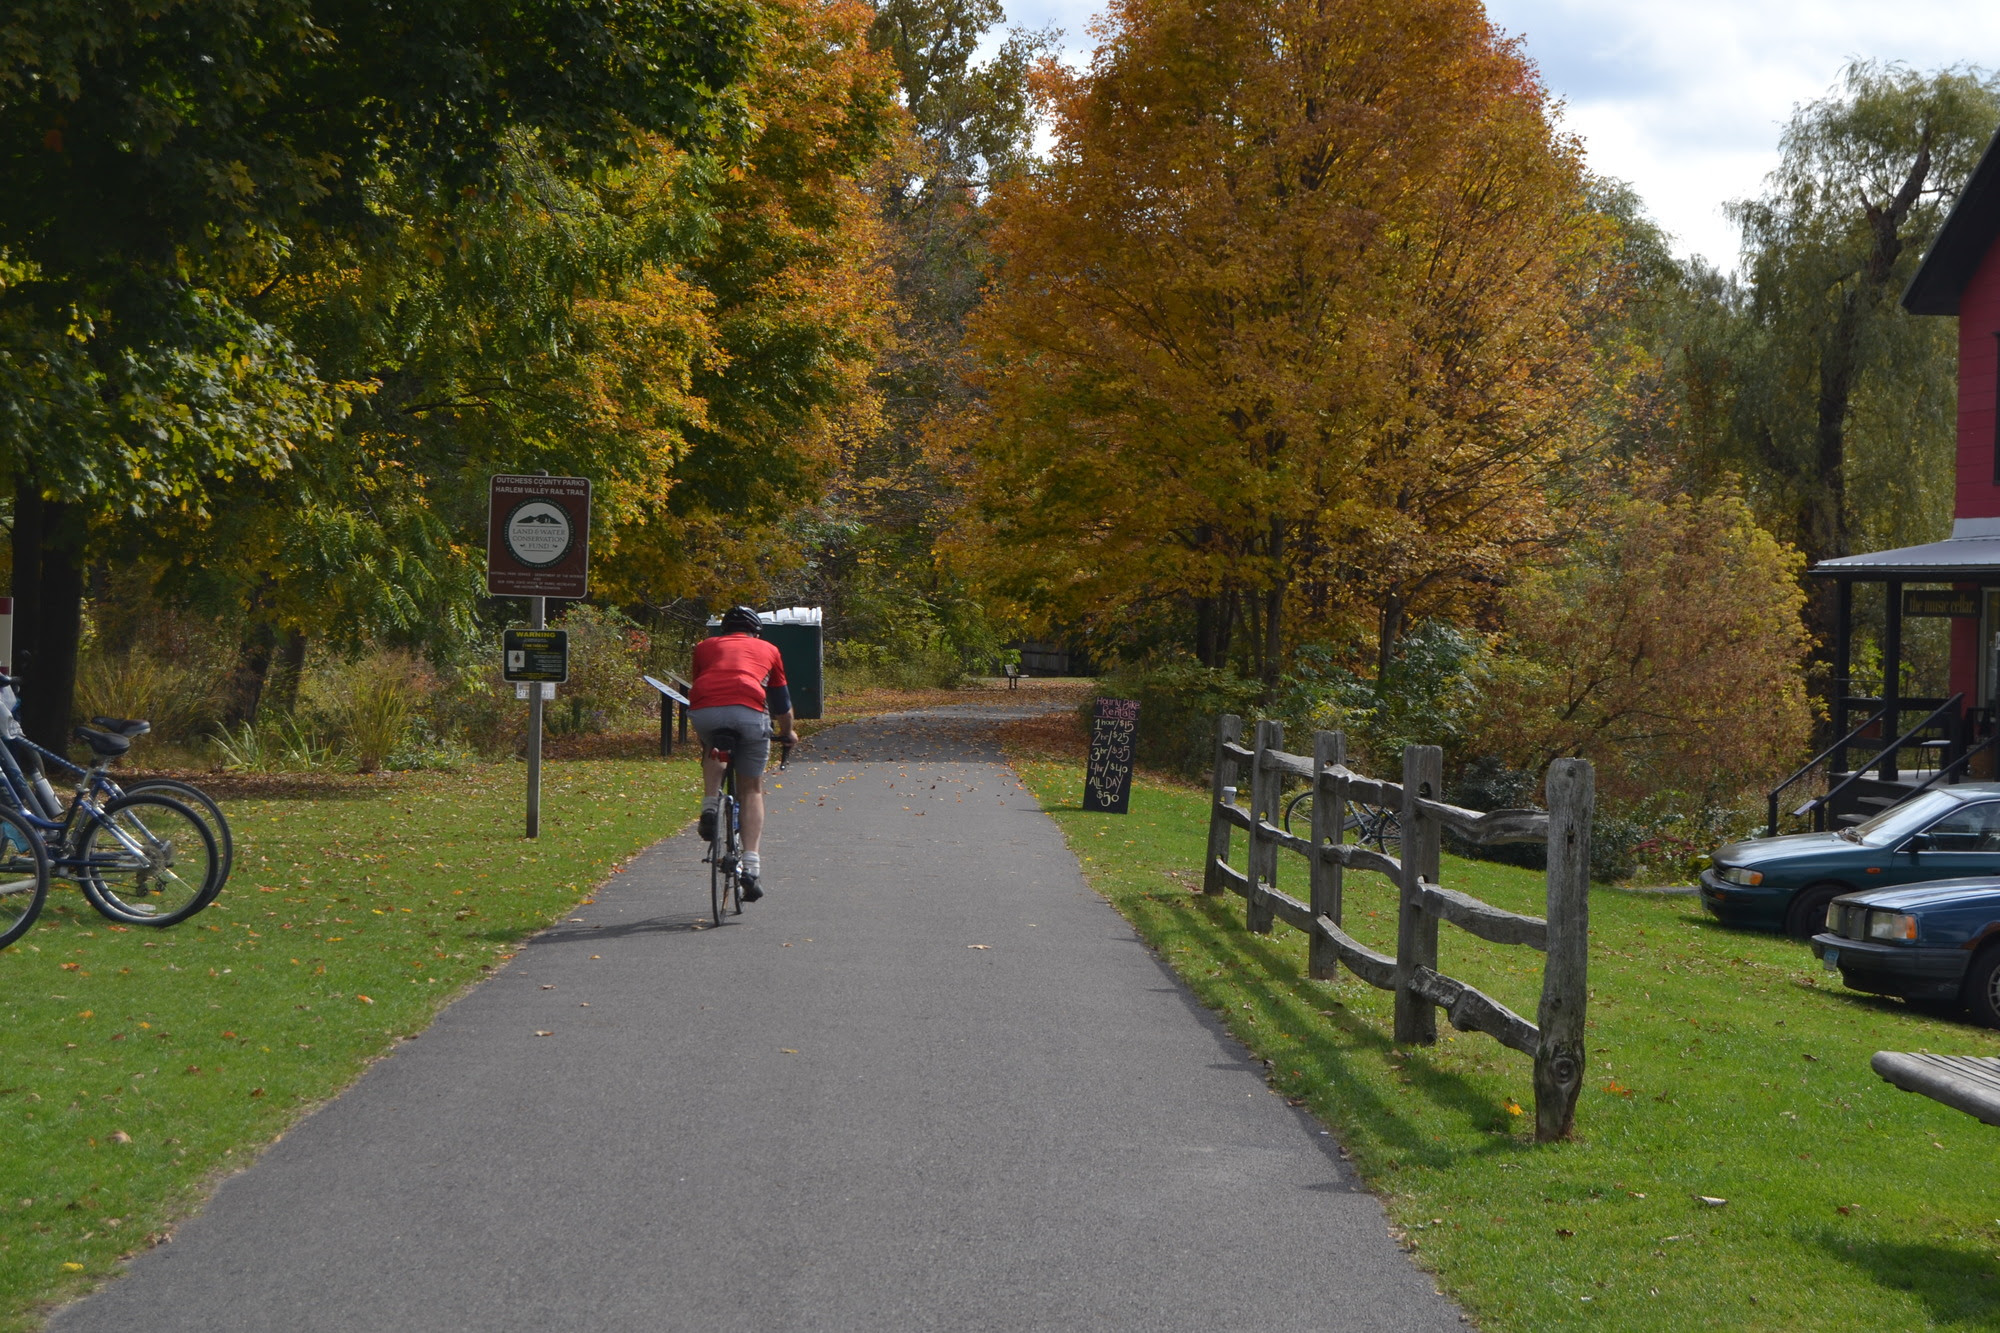 Construction for Harlem Valley Rail Trail extension has begun